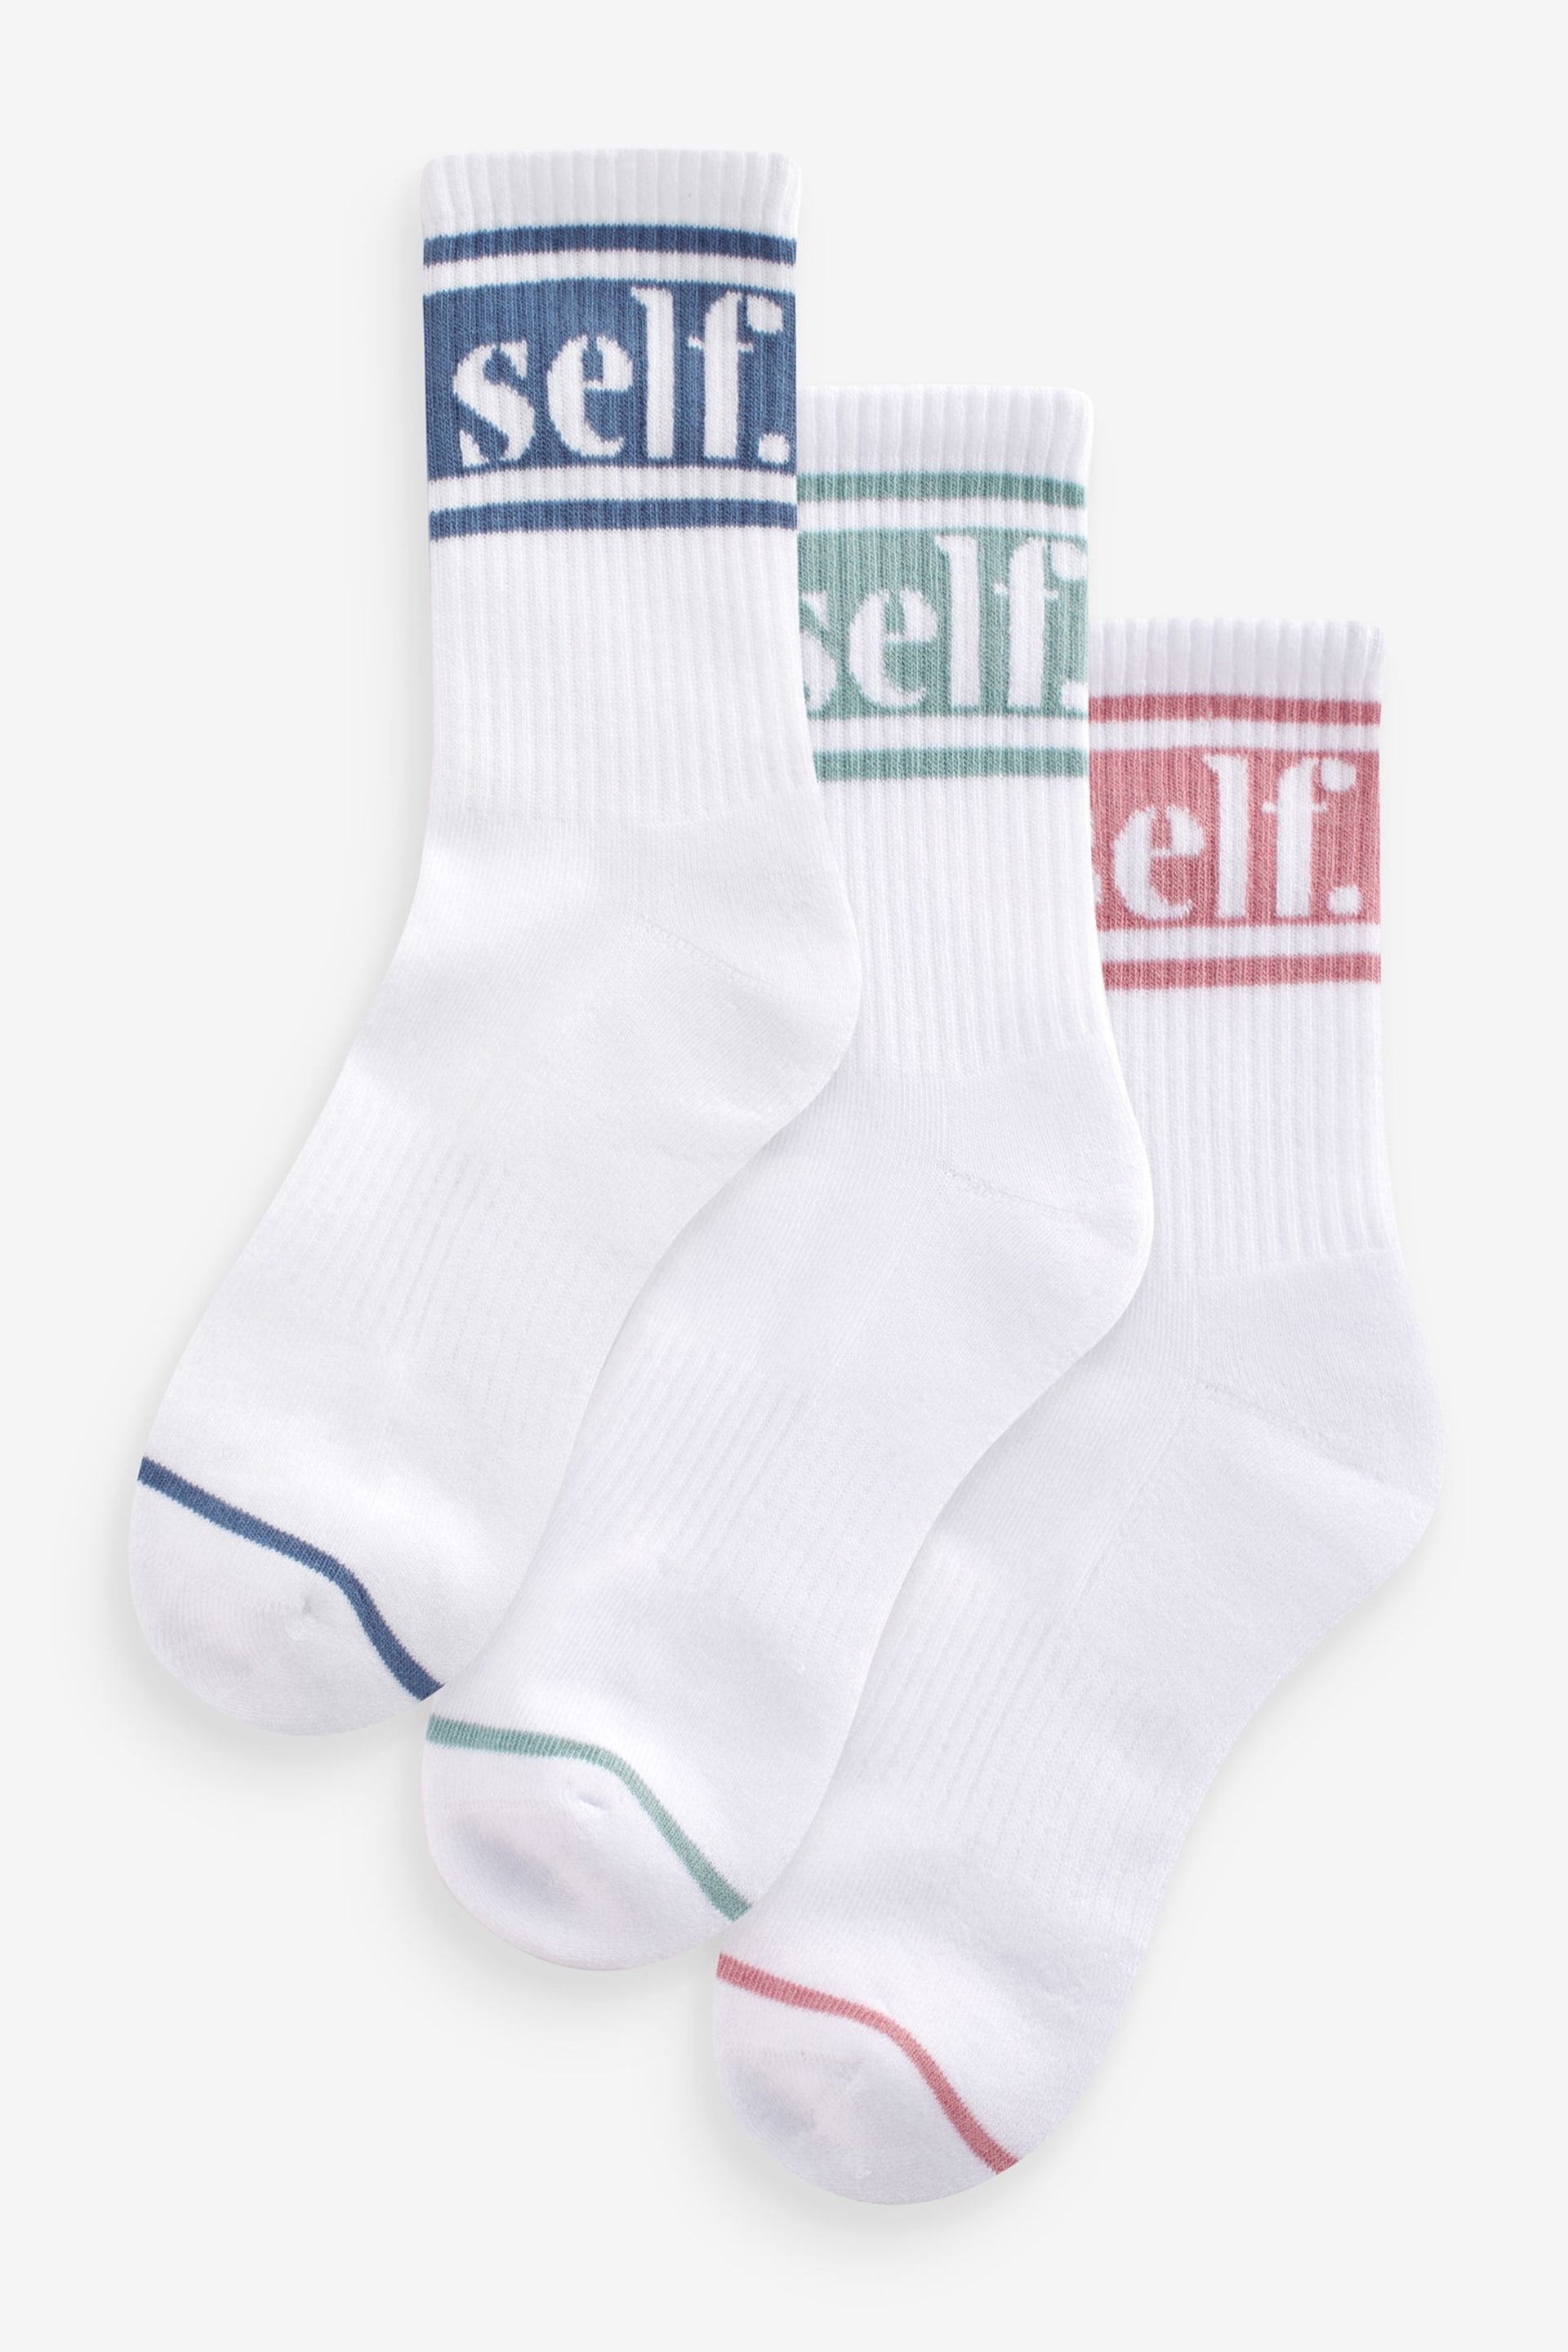 self. Pink/Navy/ Teal Cushioned Sole Ribbed Slogan Ankle Socks 3 Pack - Image 1 of 5